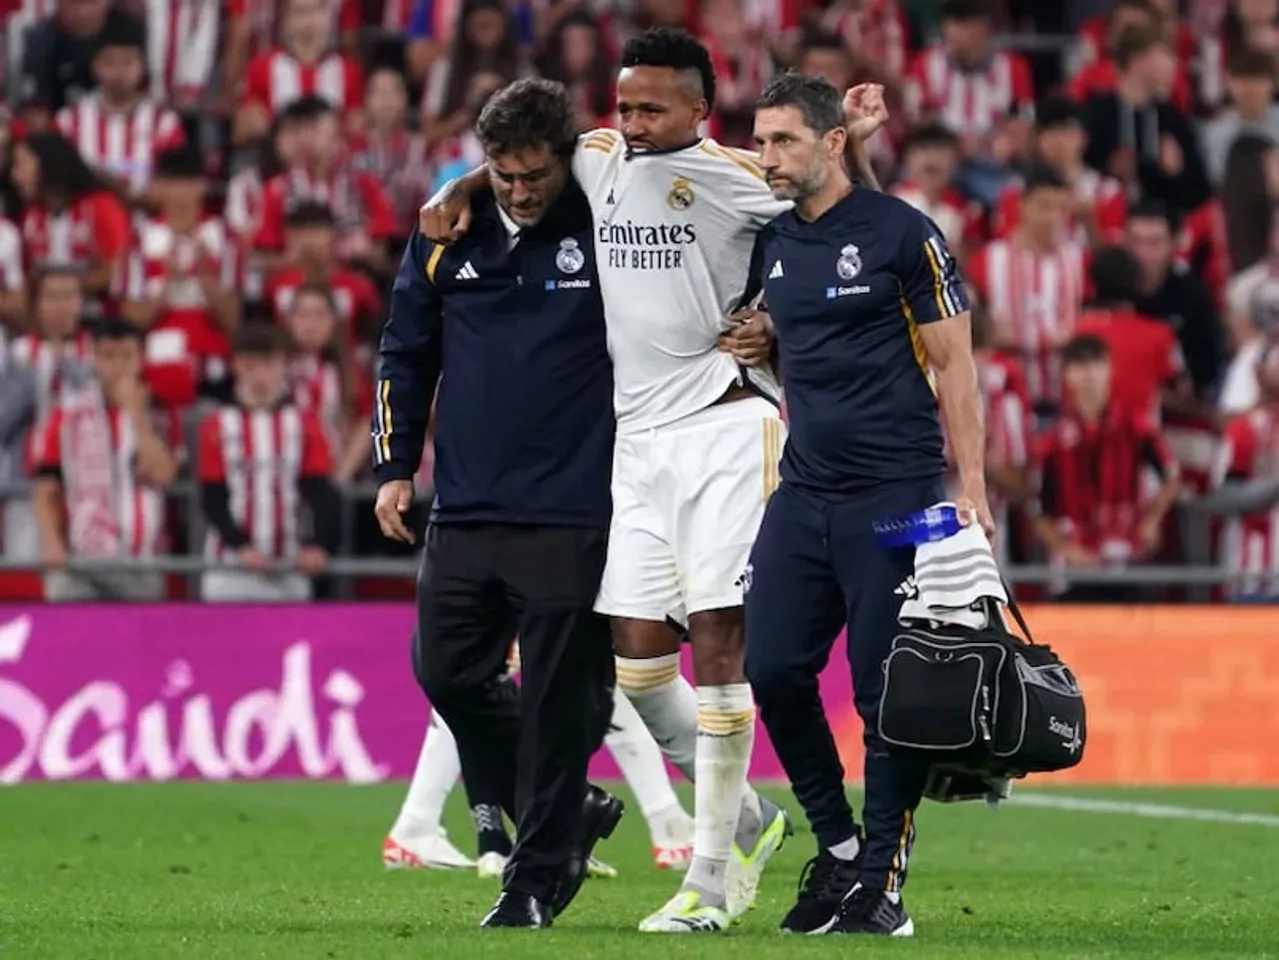 Eder Militao is Set To miss the majority of the season due to ACL injury